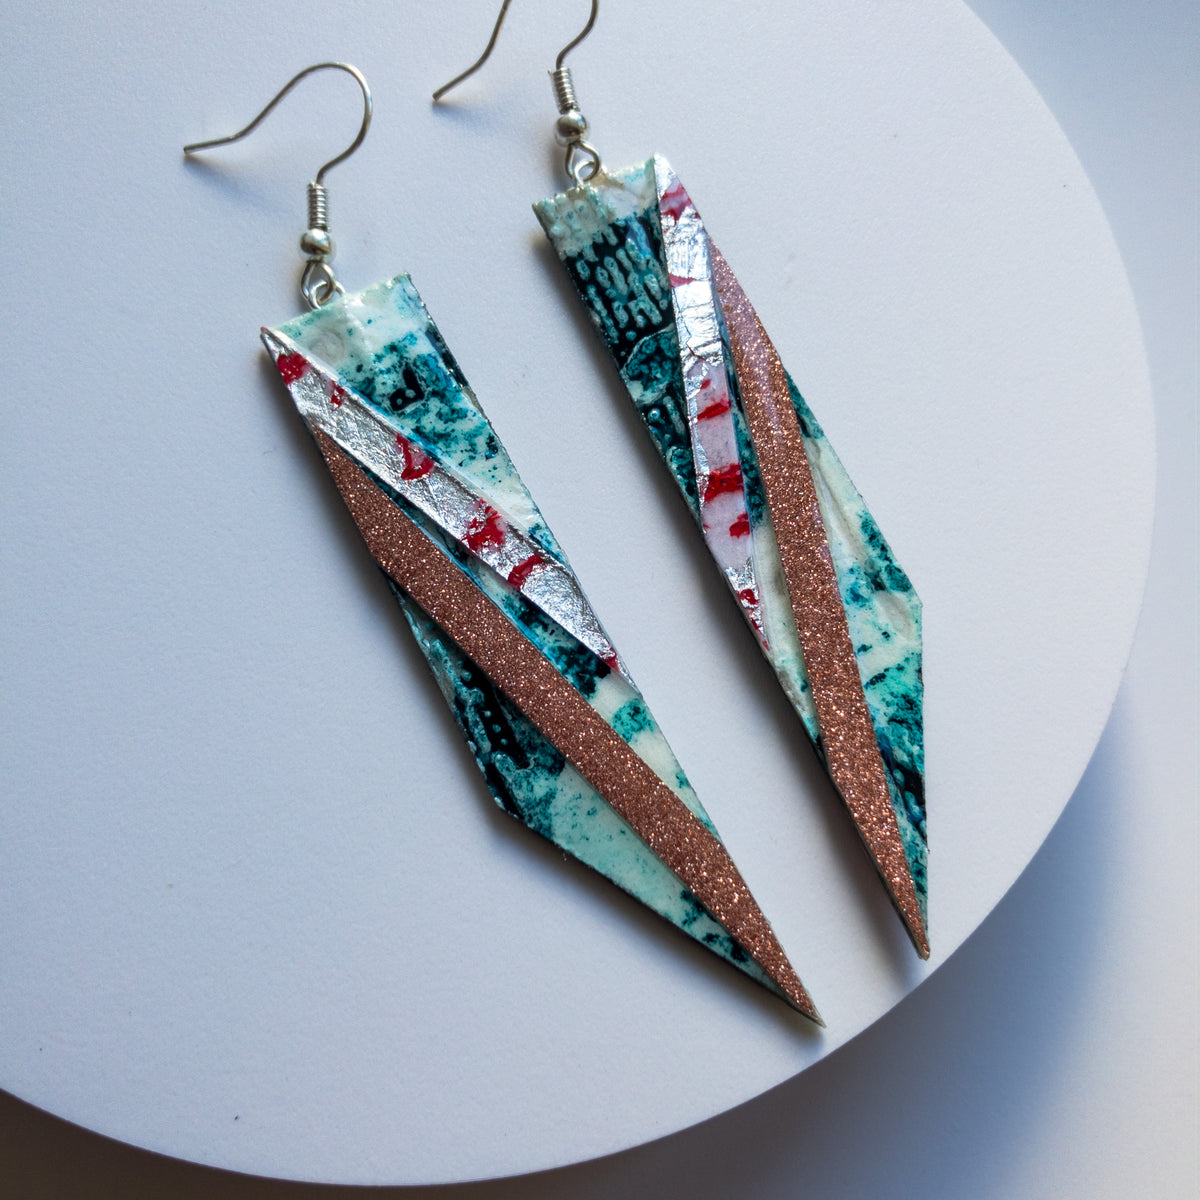 Foxtrot batik textile earrings in jade/coral/silver and blush shimmer